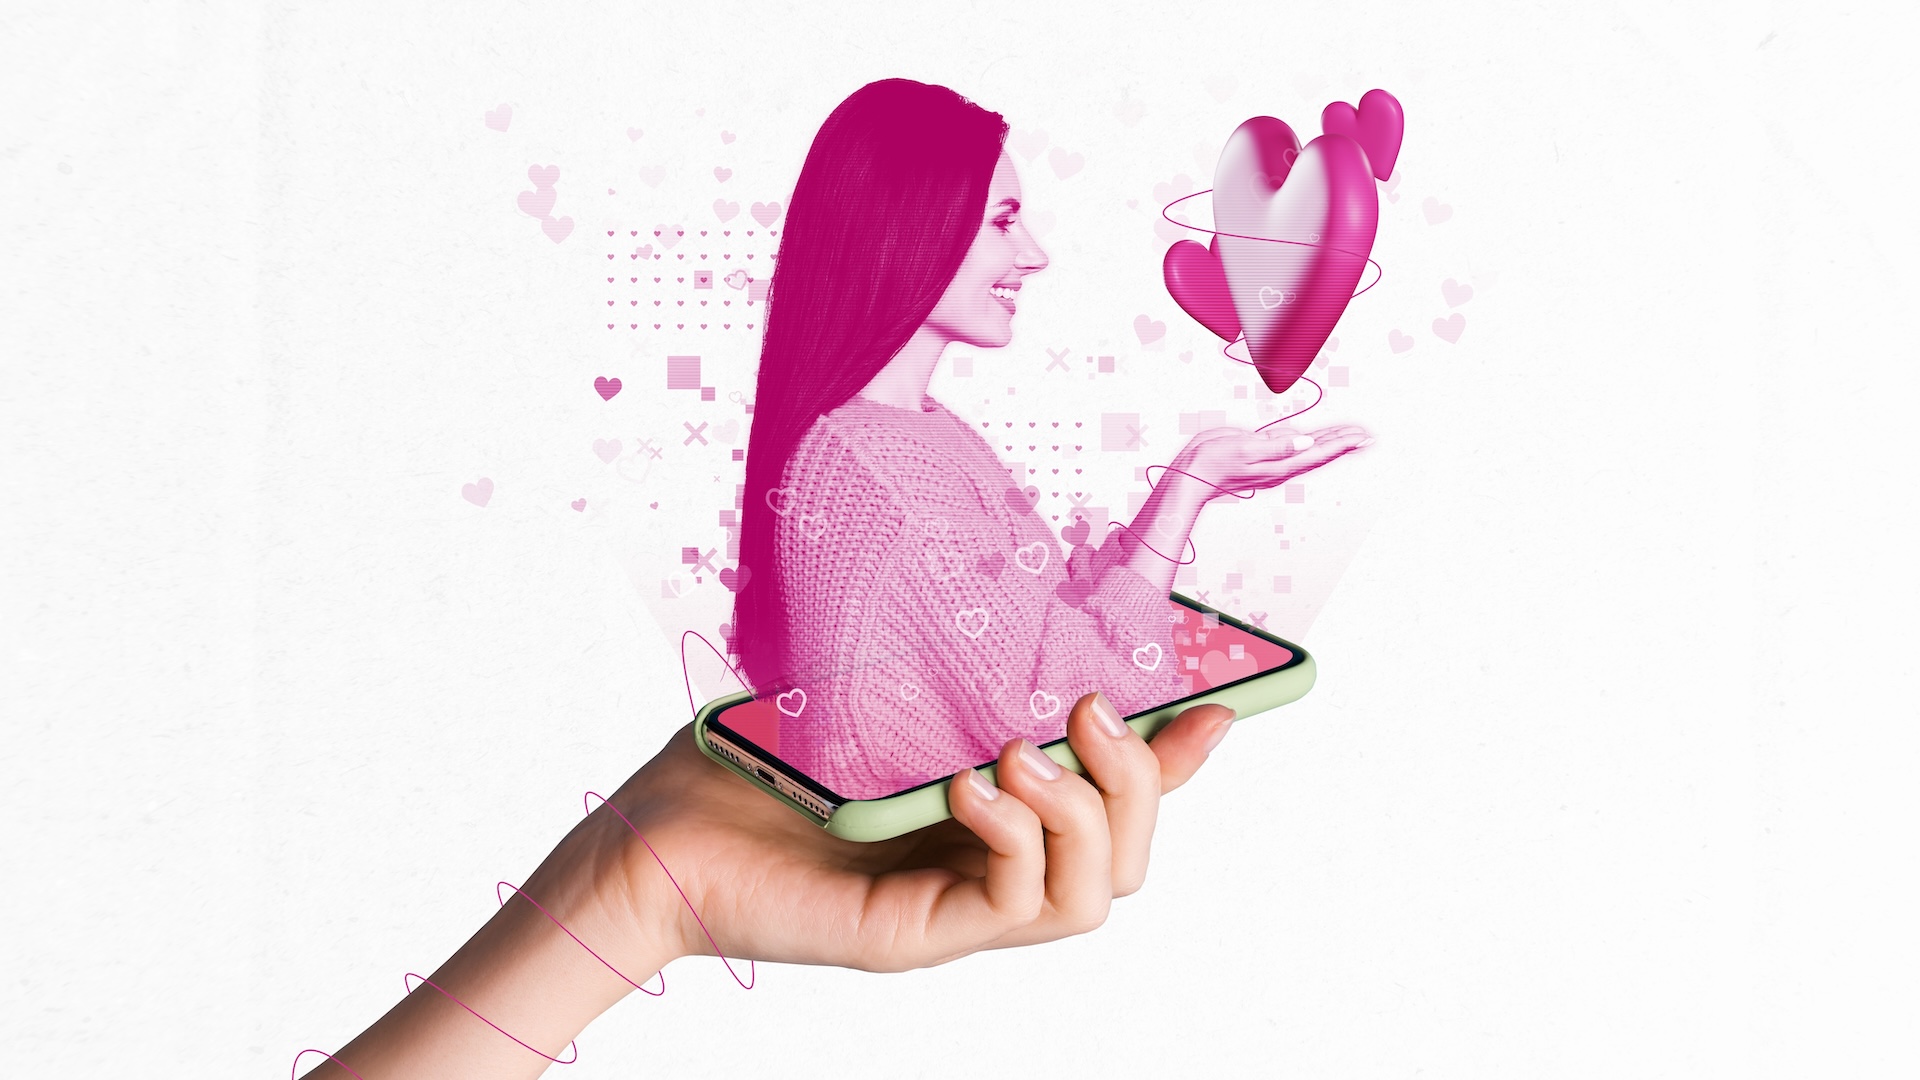 A collage of a beautiful woman coming out of the screen of a smartphone, with hearts and geometric shapes surrounding her